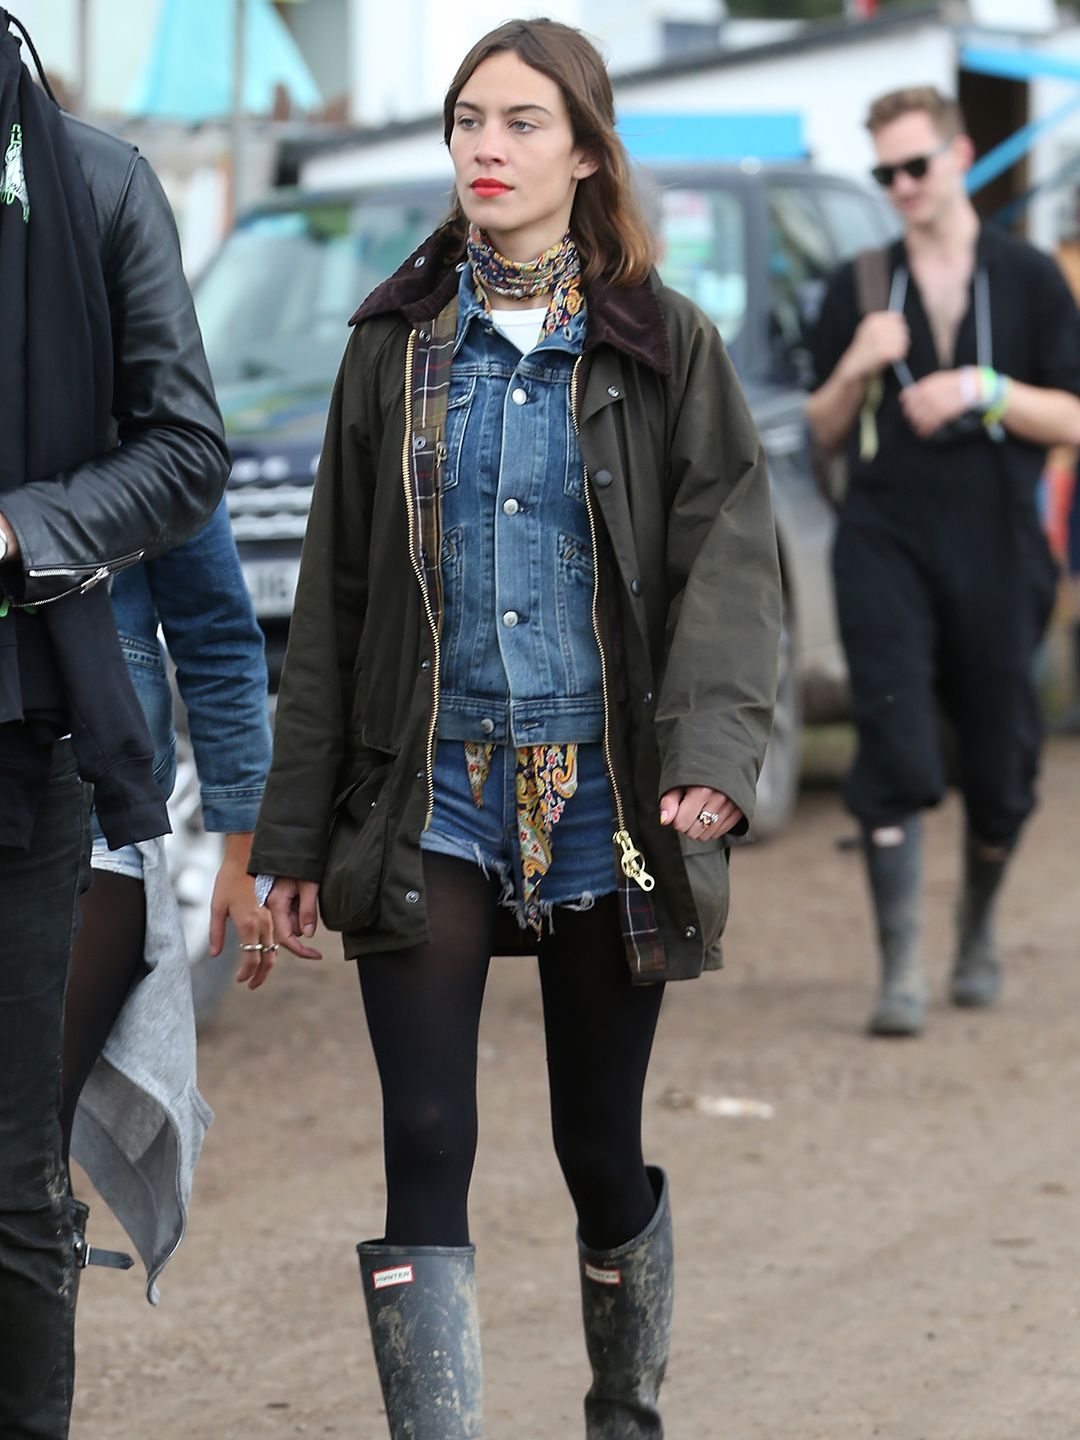 Alexa Chung opted for double denim at the festival in 2015